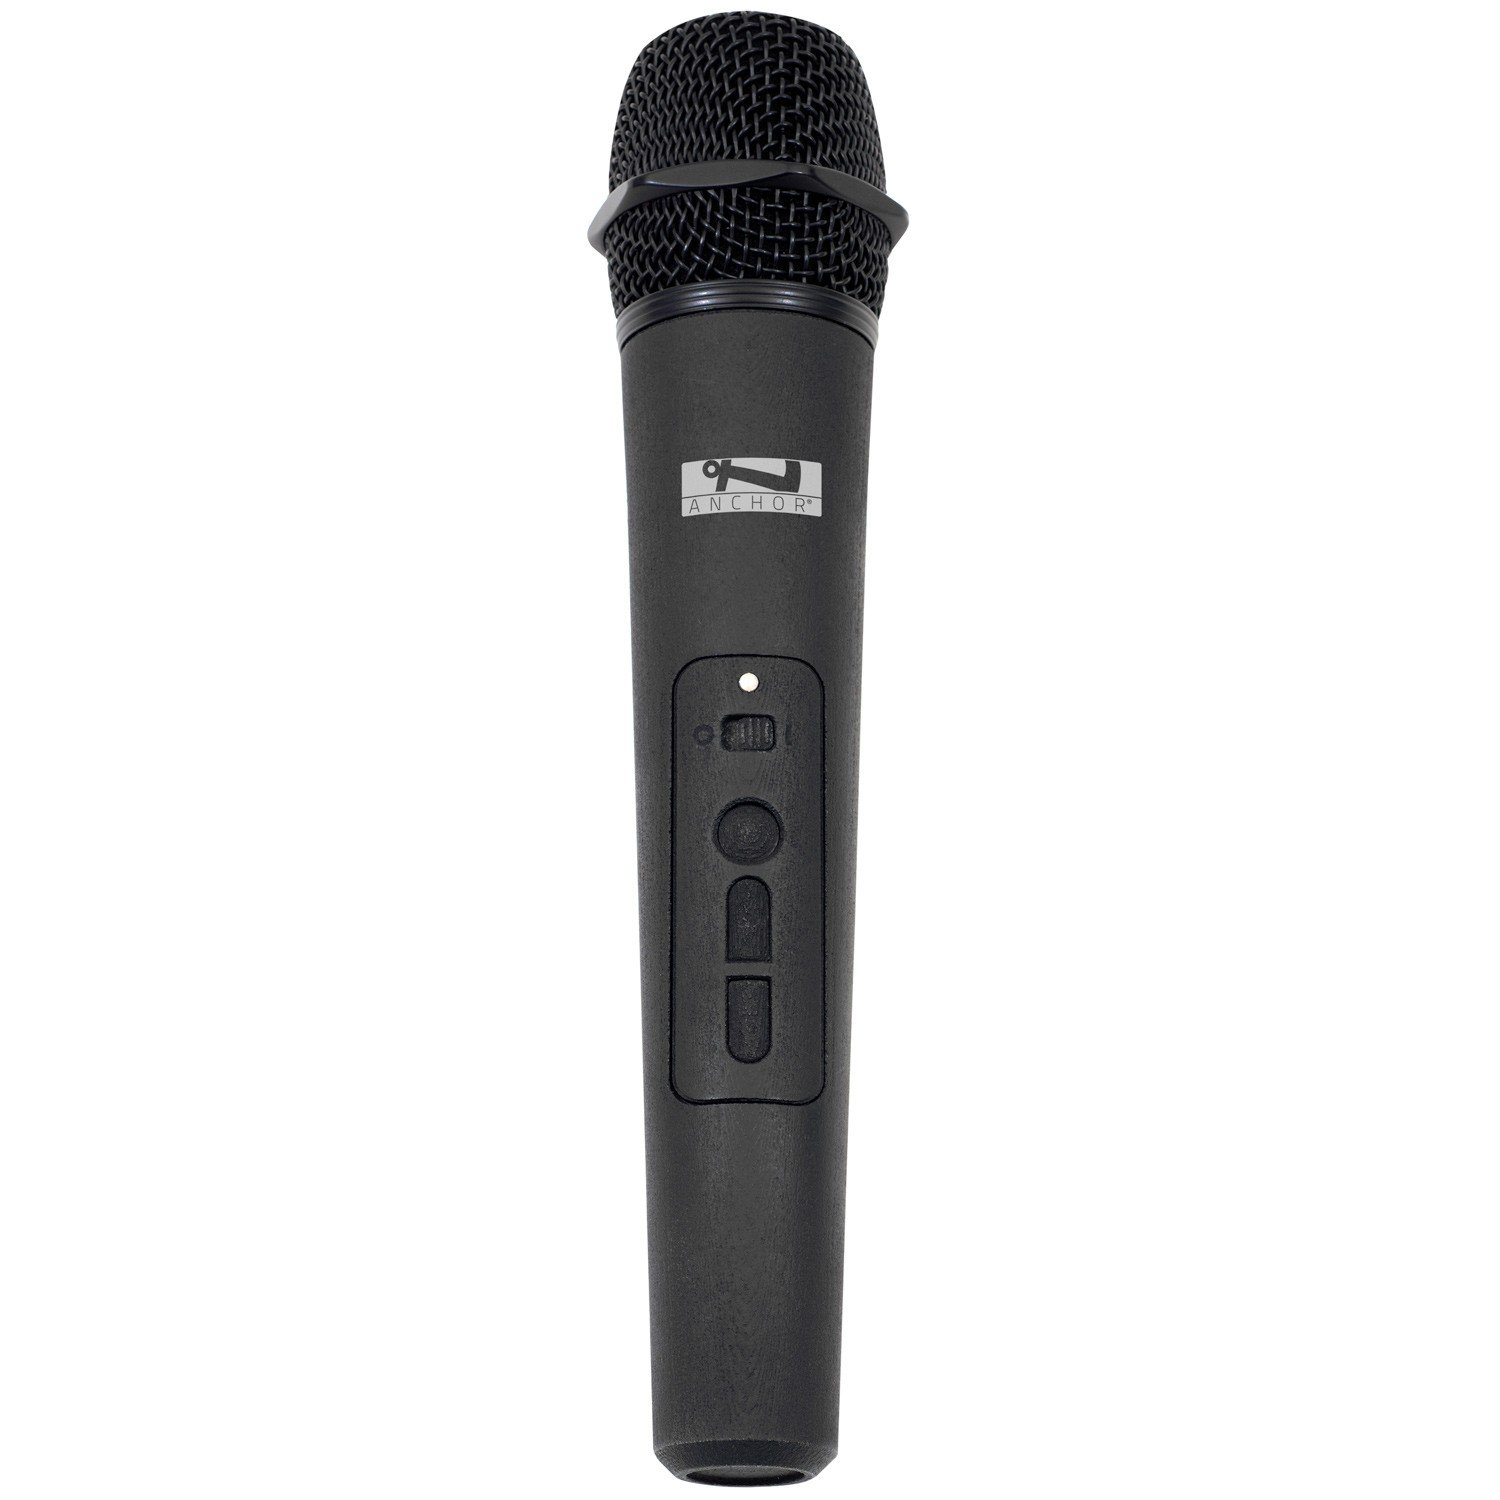 Anchor Audio AnchorLink WH-LINK Wireless Handheld Microphone